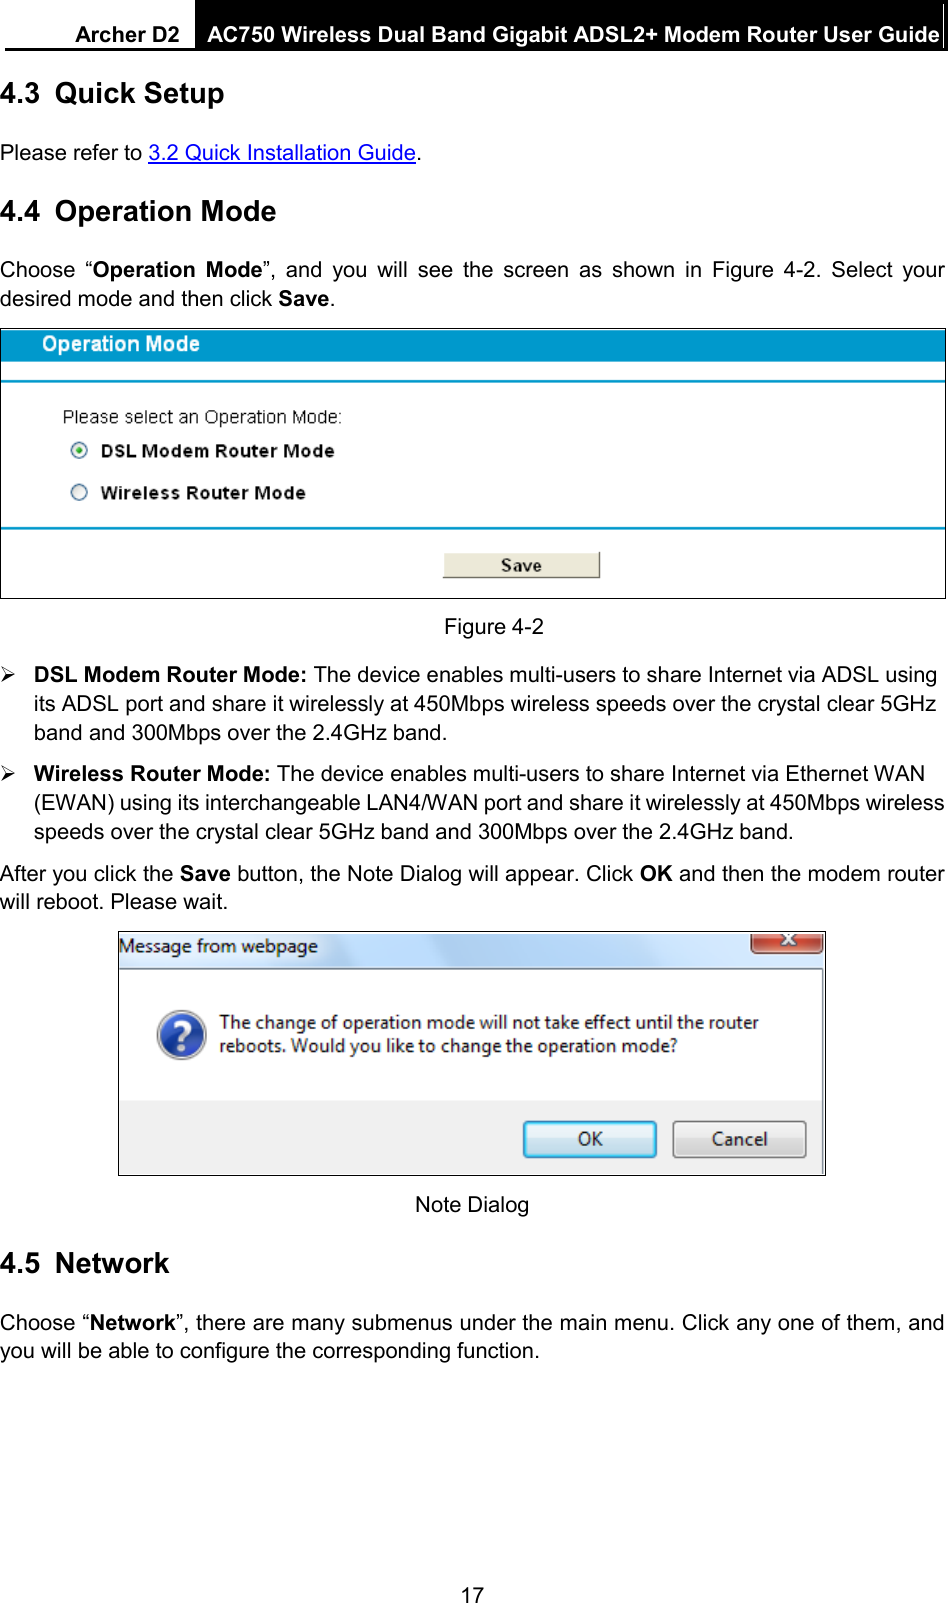 Archer D2 AC750 Wireless Dual Band Gigabit ADSL2+ Modem Router User Guide  4.3 Quick Setup Please refer to 3.2 Quick Installation Guide. 4.4 Operation Mode Choose “Operation Mode”, and you will see the screen as shown in Figure  4-2. Select your desired mode and then click Save.  Figure 4-2  DSL Modem Router Mode: The device enables multi-users to share Internet via ADSL using its ADSL port and share it wirelessly at 450Mbps wireless speeds over the crystal clear 5GHz band and 300Mbps over the 2.4GHz band.  Wireless Router Mode: The device enables multi-users to share Internet via Ethernet WAN (EWAN) using its interchangeable LAN4/WAN port and share it wirelessly at 450Mbps wireless speeds over the crystal clear 5GHz band and 300Mbps over the 2.4GHz band. After you click the Save button, the Note Dialog will appear. Click OK and then the modem router will reboot. Please wait.  Note Dialog 4.5 Network Choose “Network”, there are many submenus under the main menu. Click any one of them, and you will be able to configure the corresponding function.   17 